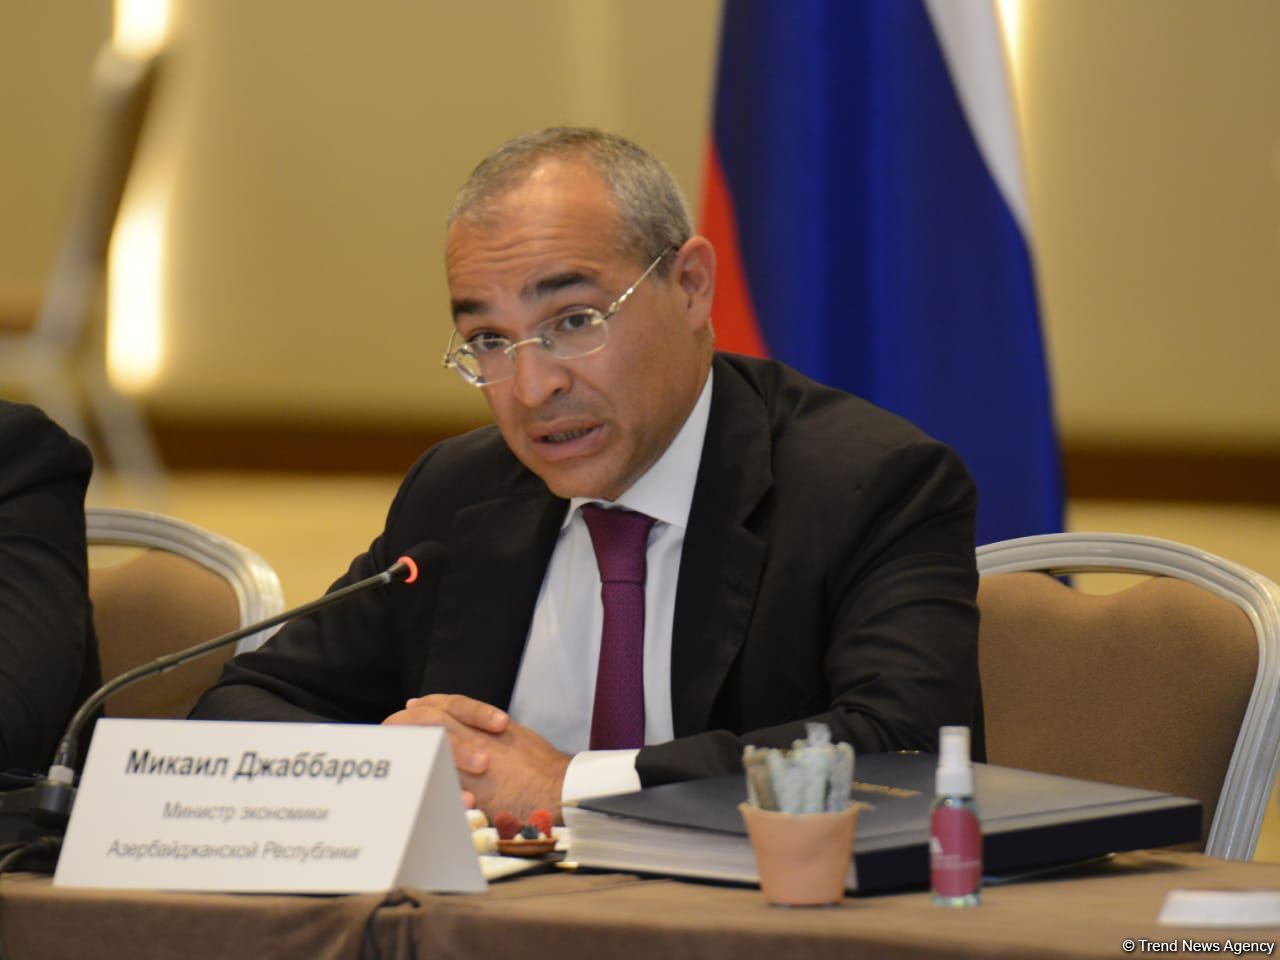 Azerbaijan aims to boost trade turnover with Russia - minister